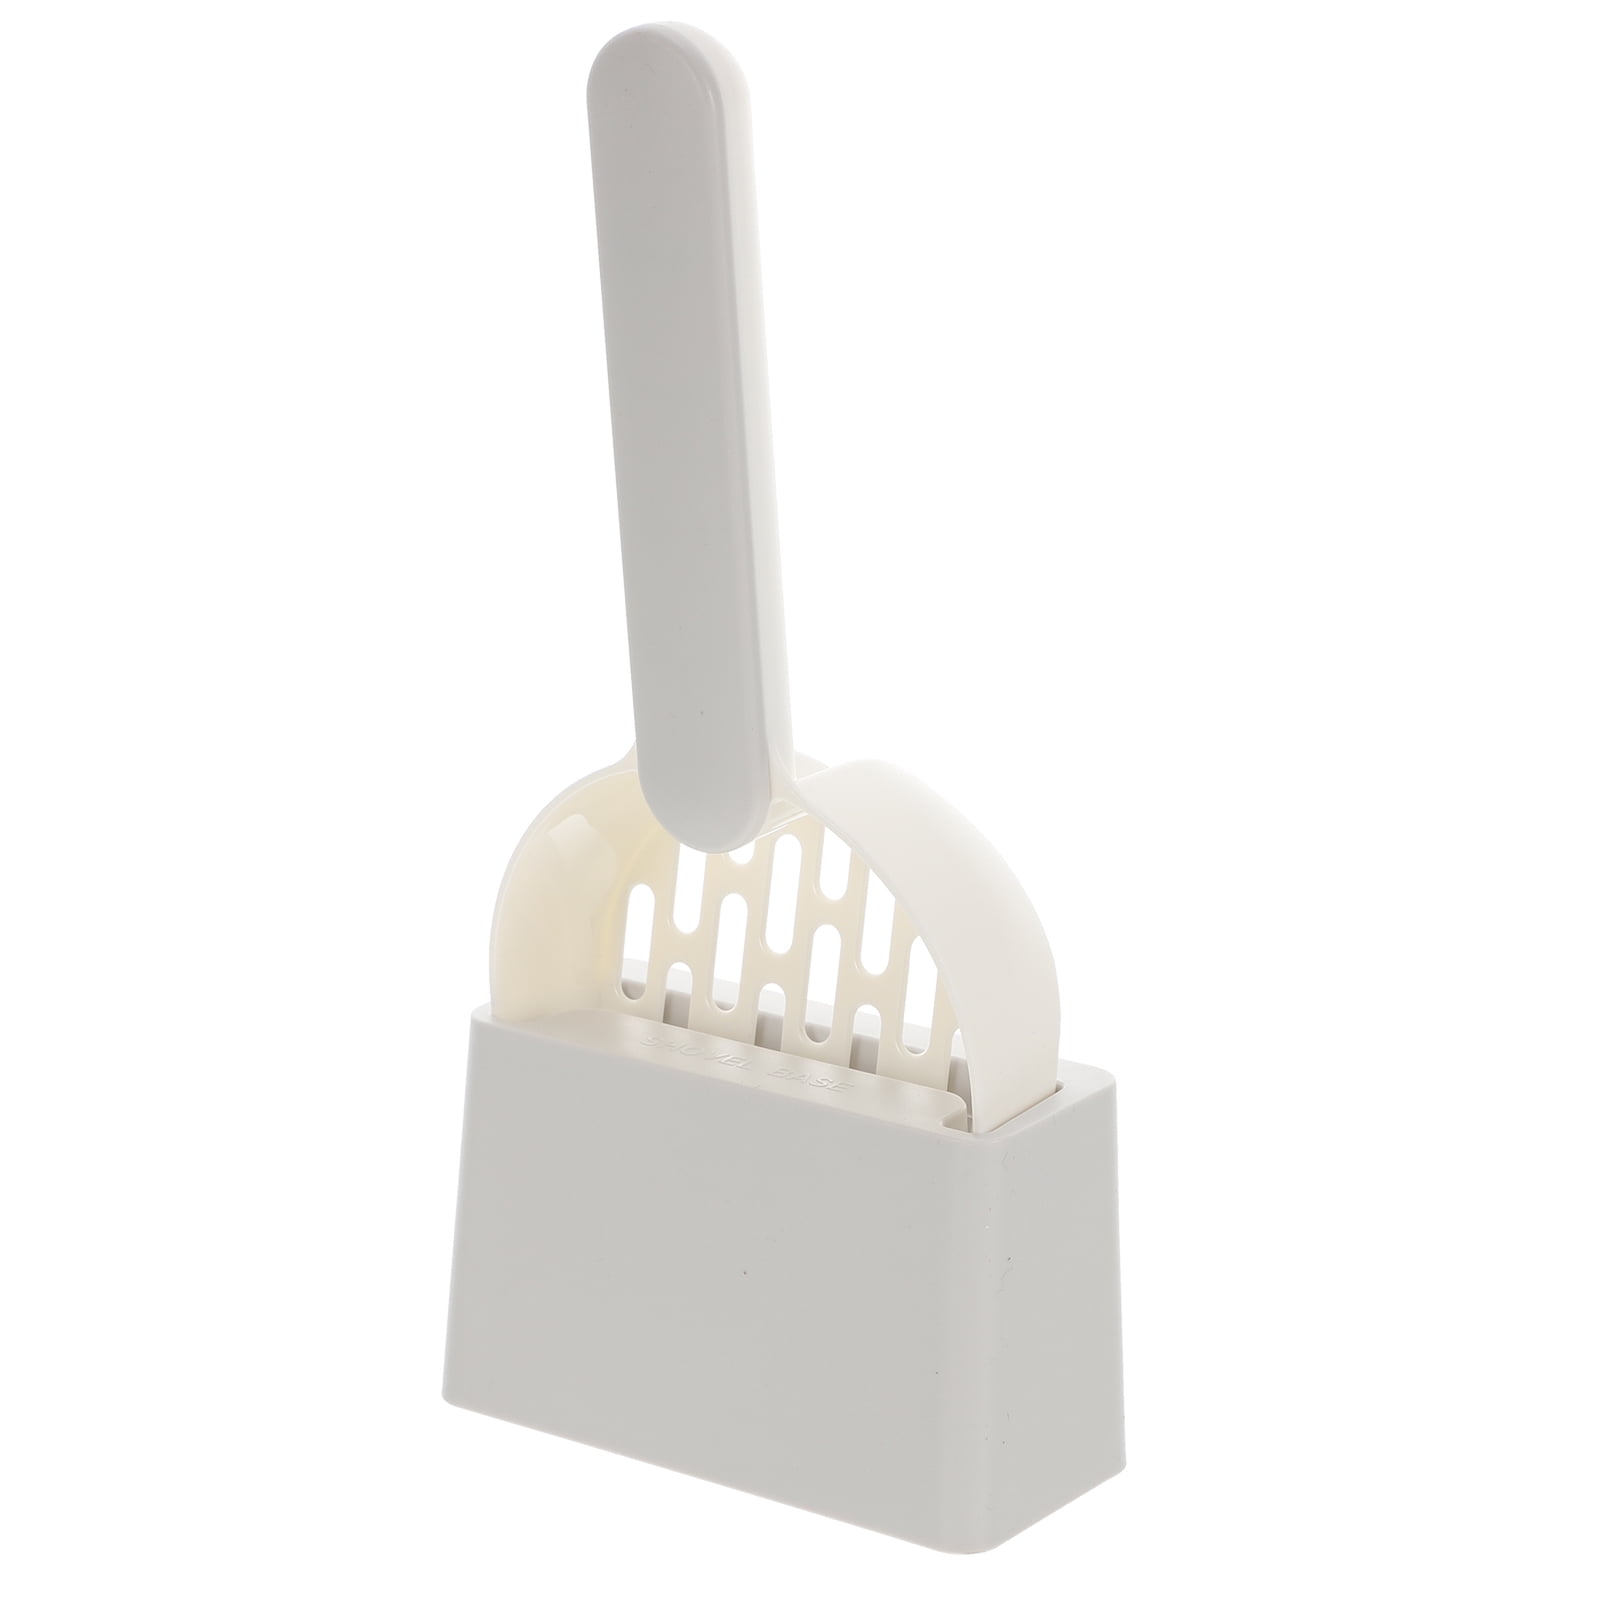 A-Lkatsthy Premium Cat Litter Scoop Holder Simple White Small Trash can